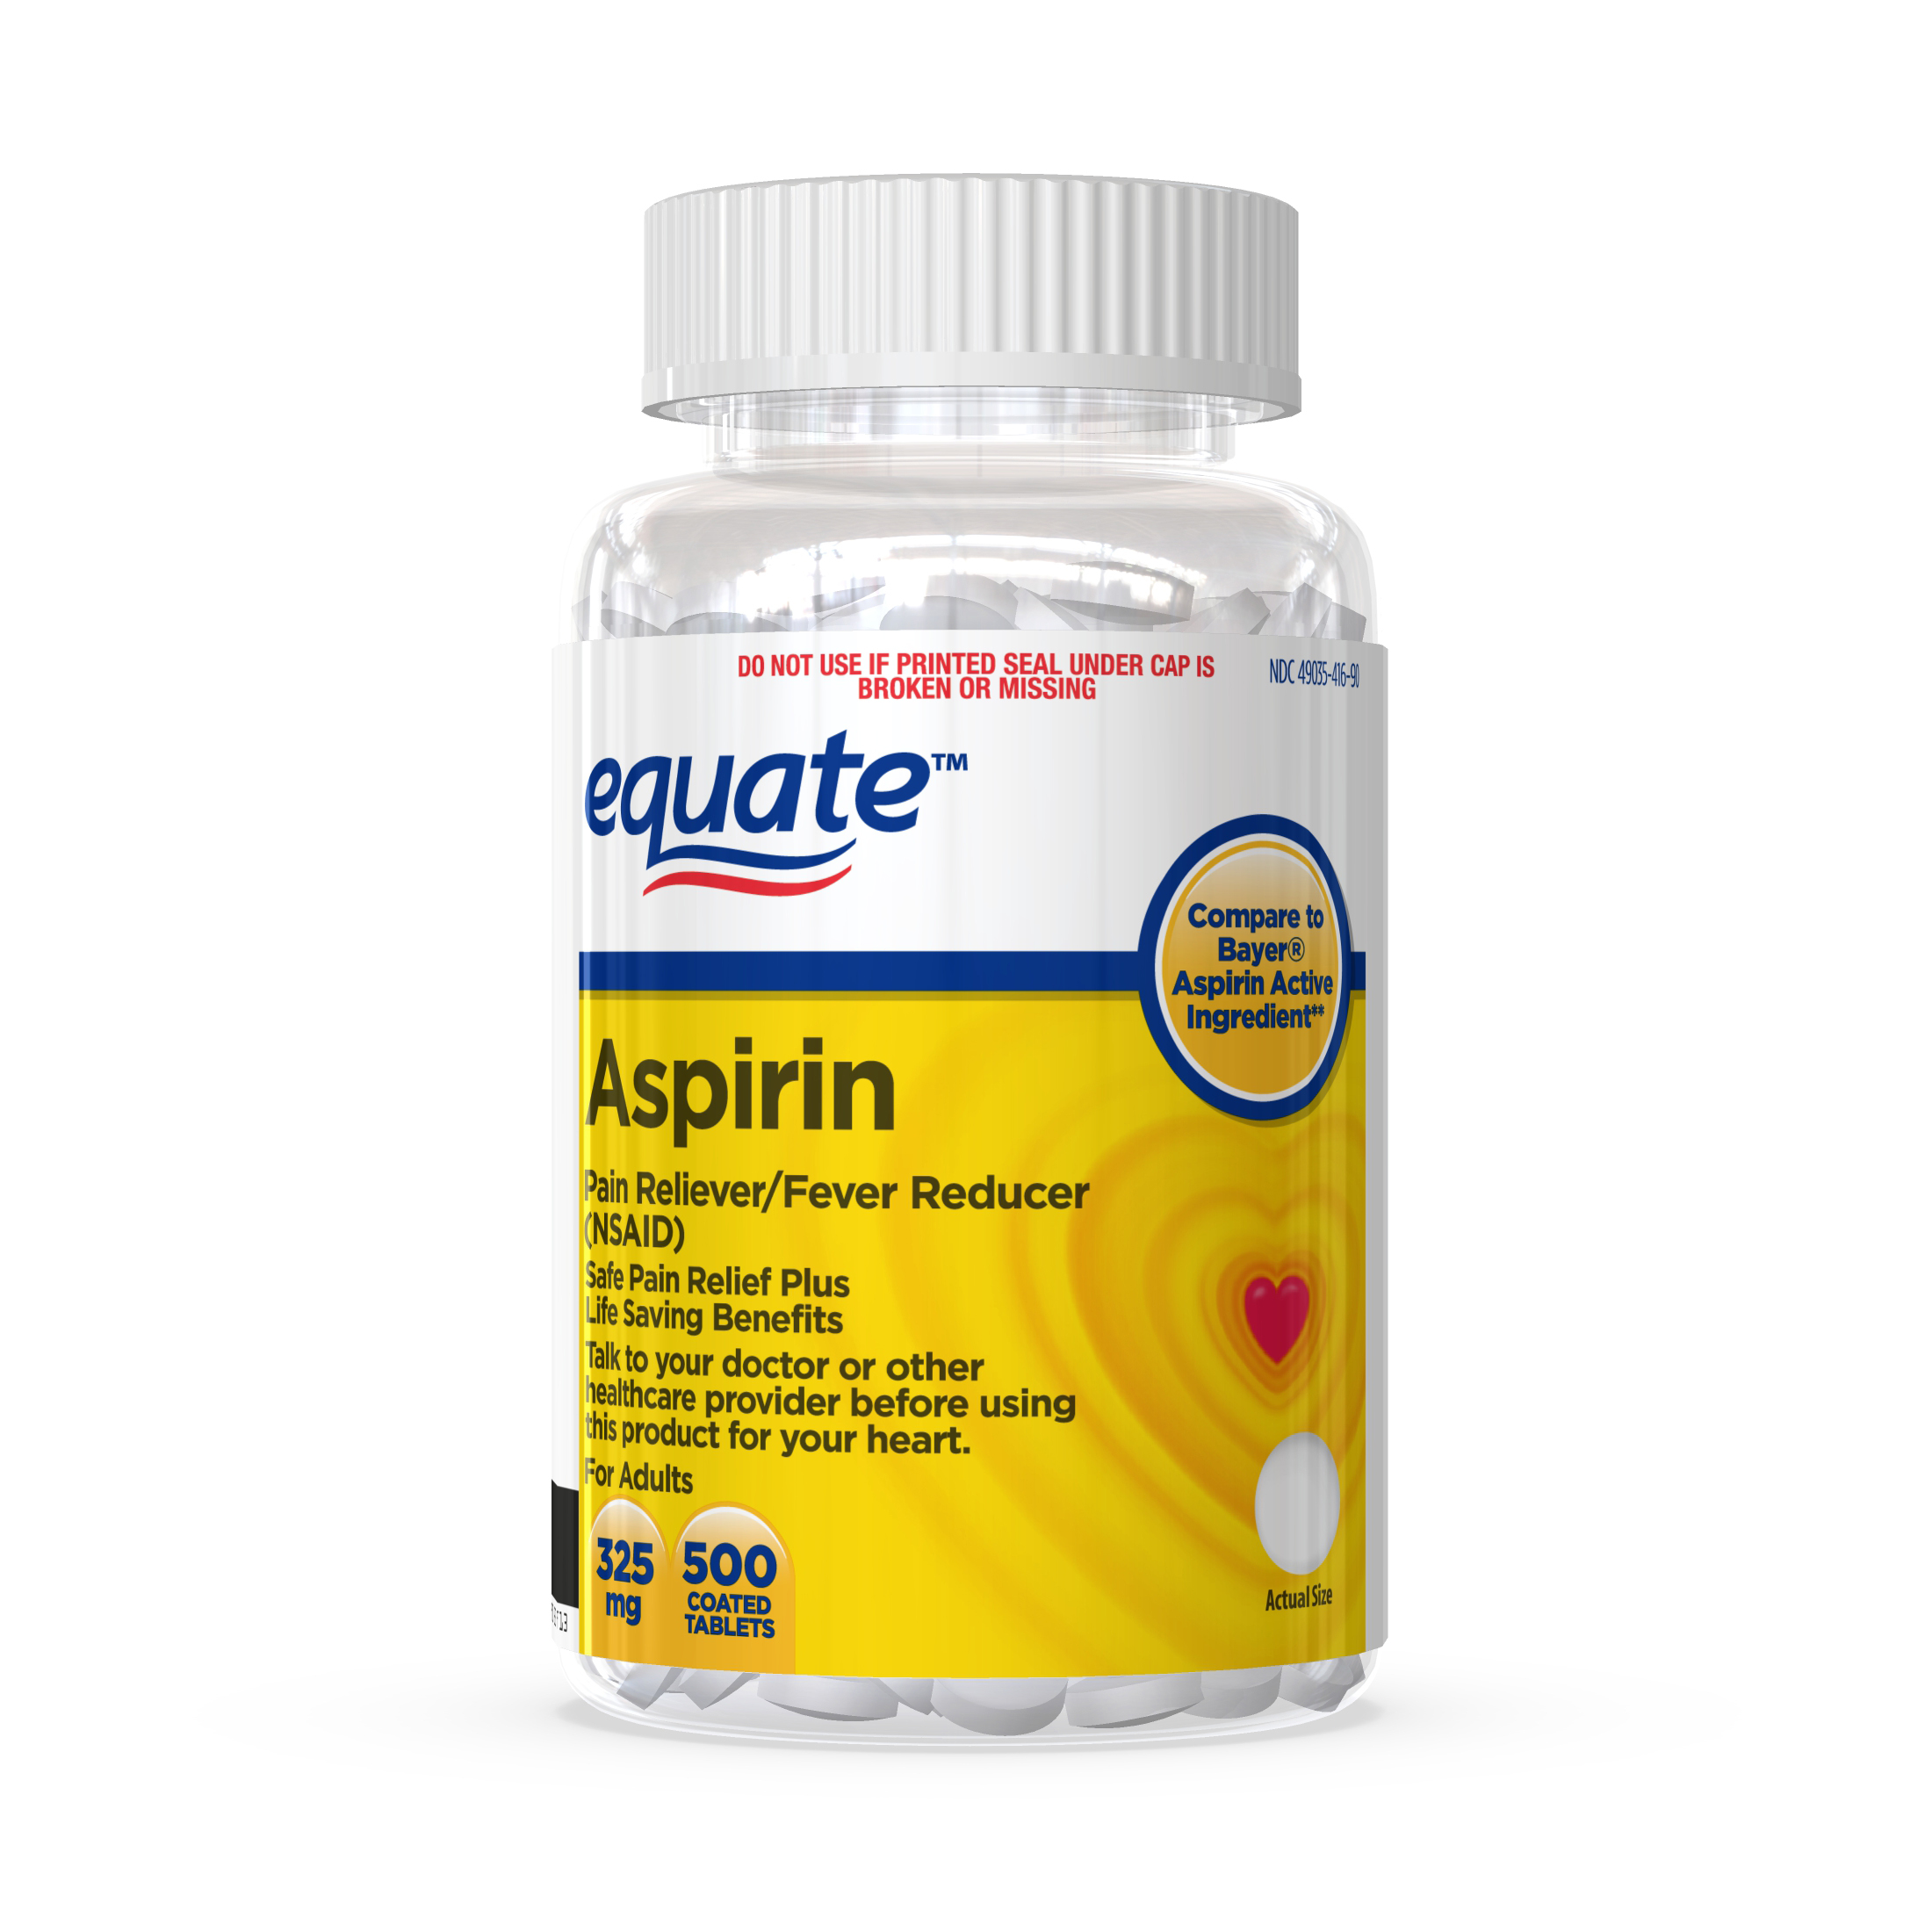 Equate Aspirin Pain Reliever and Fever Reducer (NSAID) Coated Tablets, 325 mg, (NSAID), 500 Count - image 1 of 8